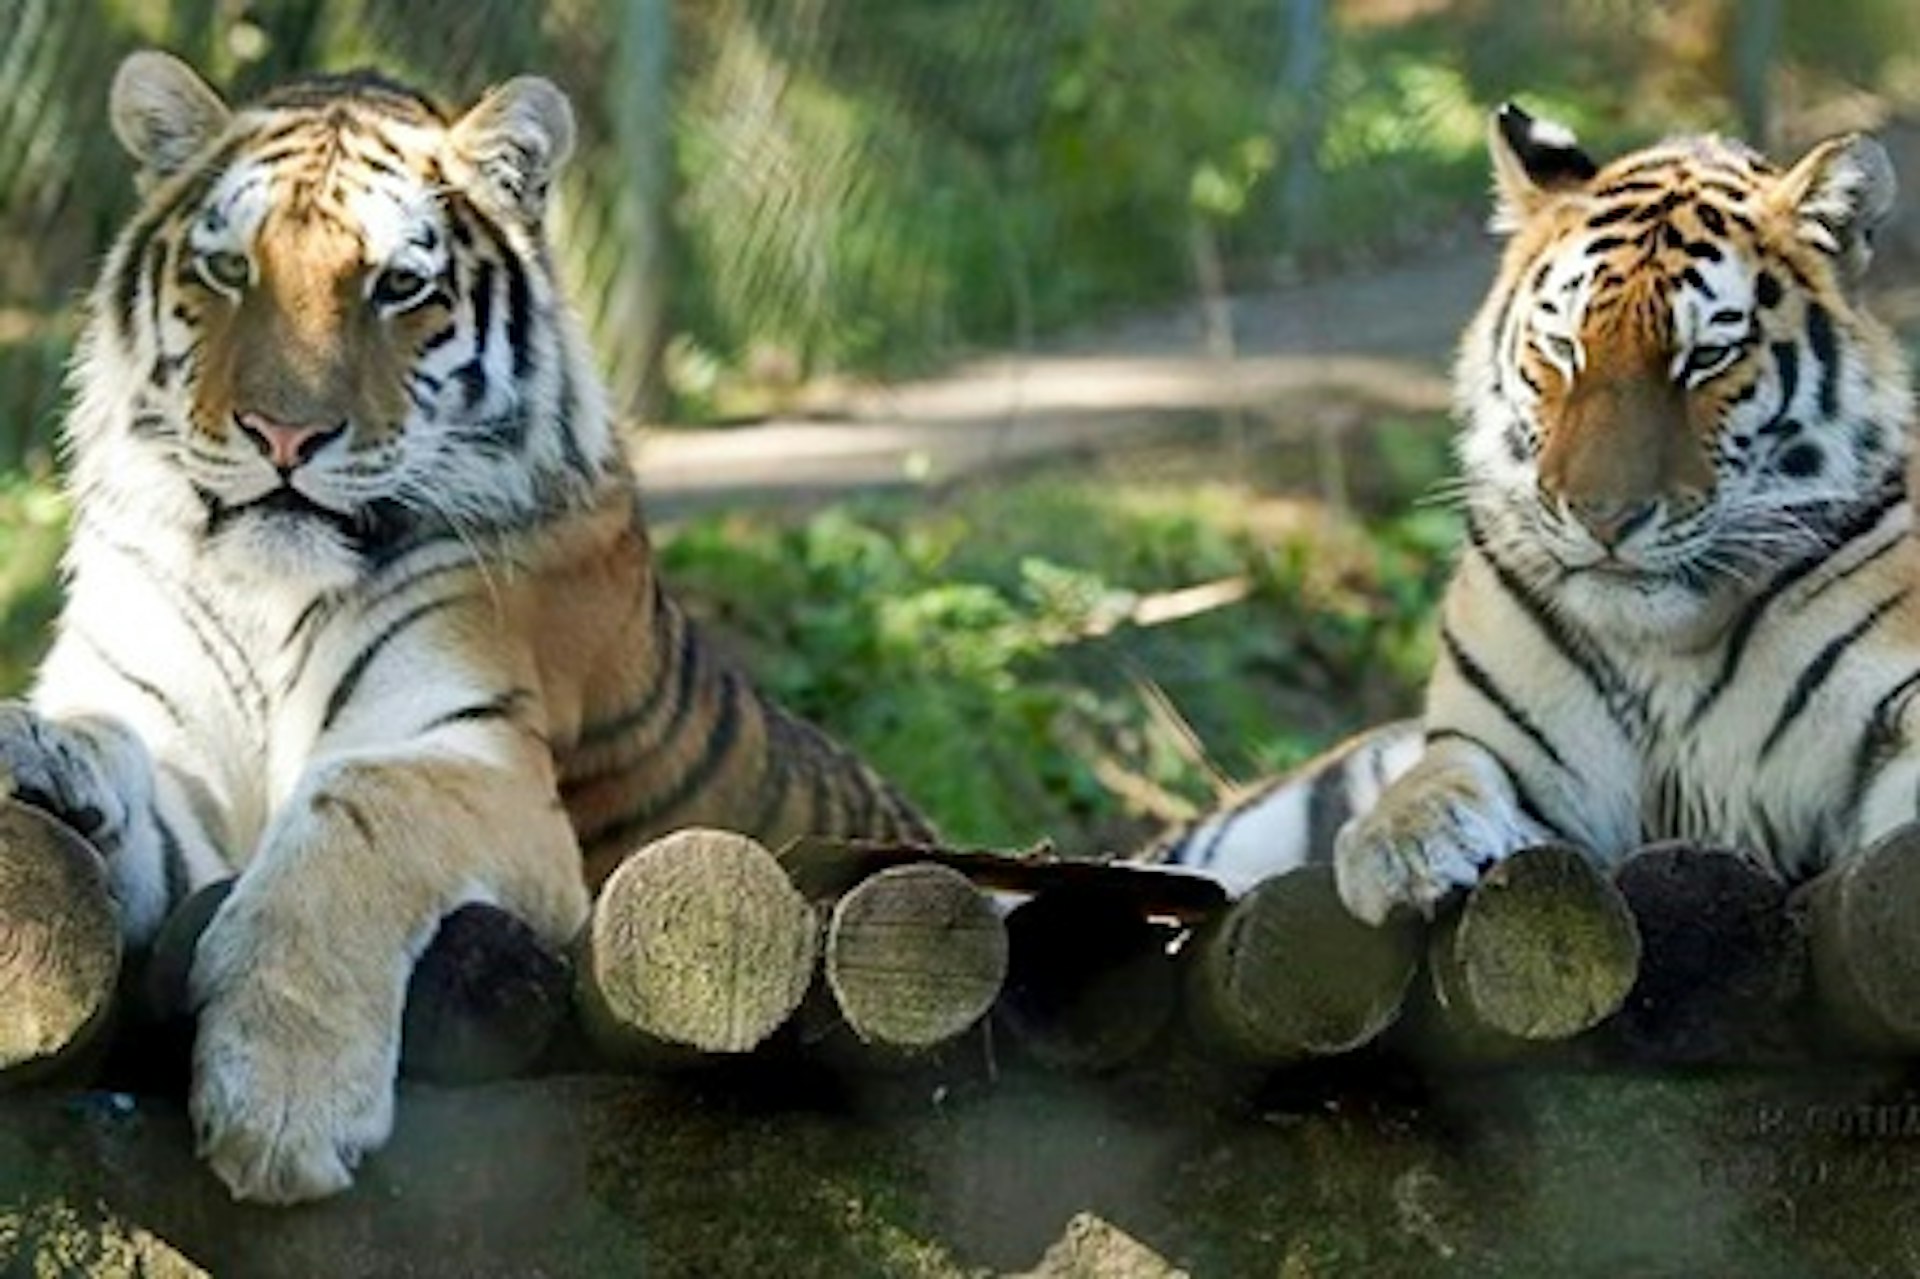 Tiger Encounter for Two at Dartmoor Zoo 2